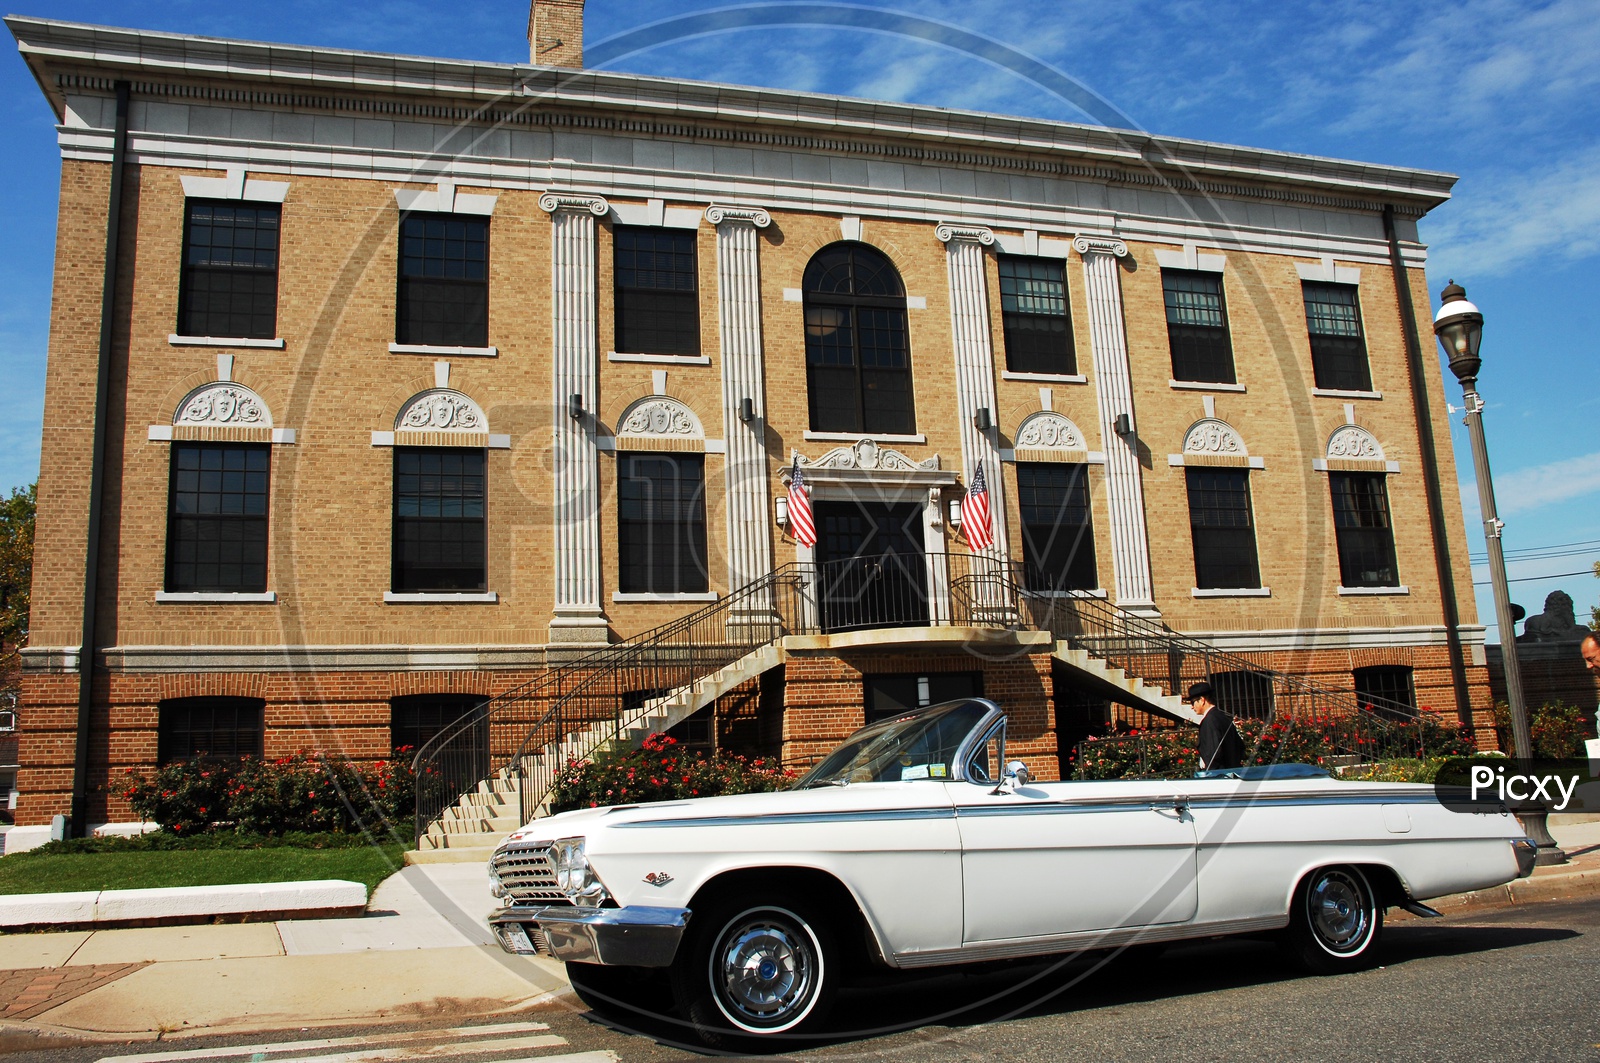 Chevrolet Impala classic topless white car besides a building